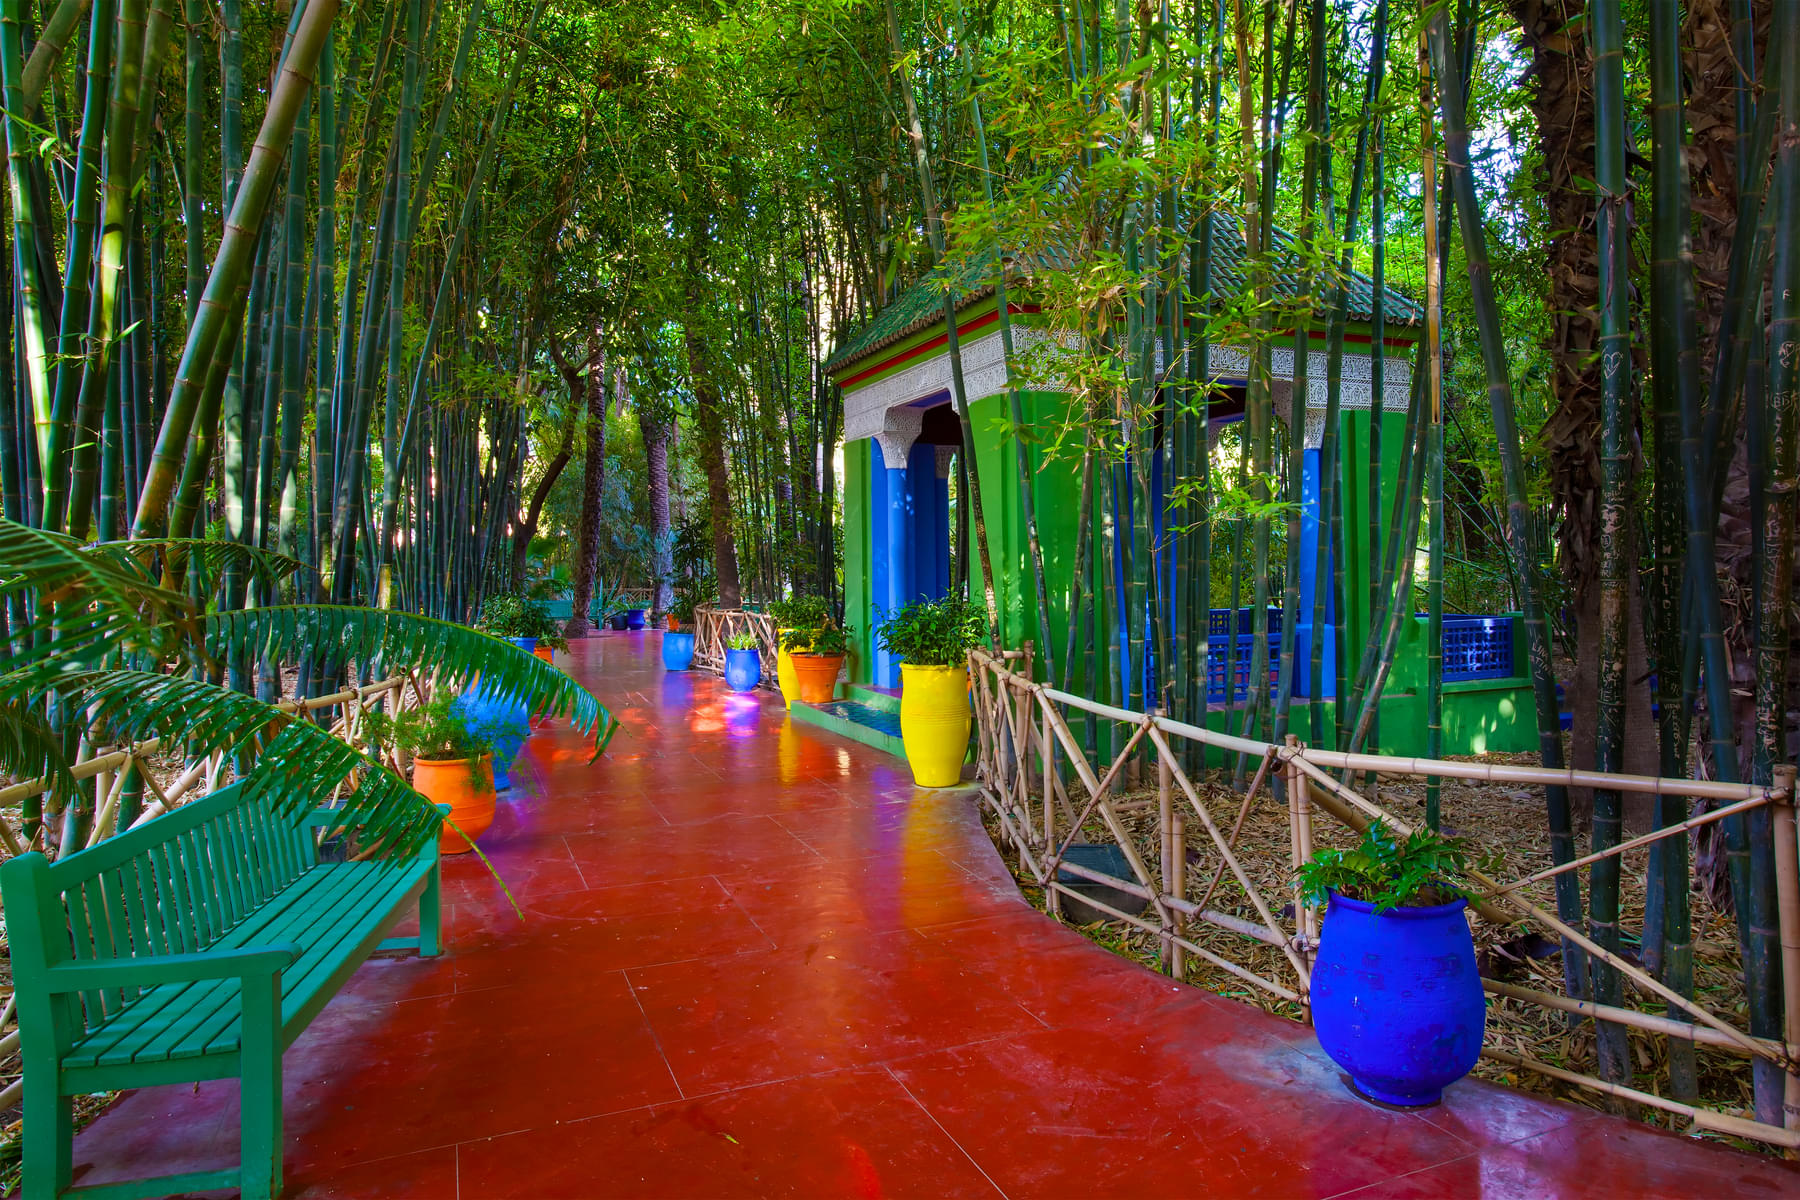 Stroll through the pathways covered with lush greenery